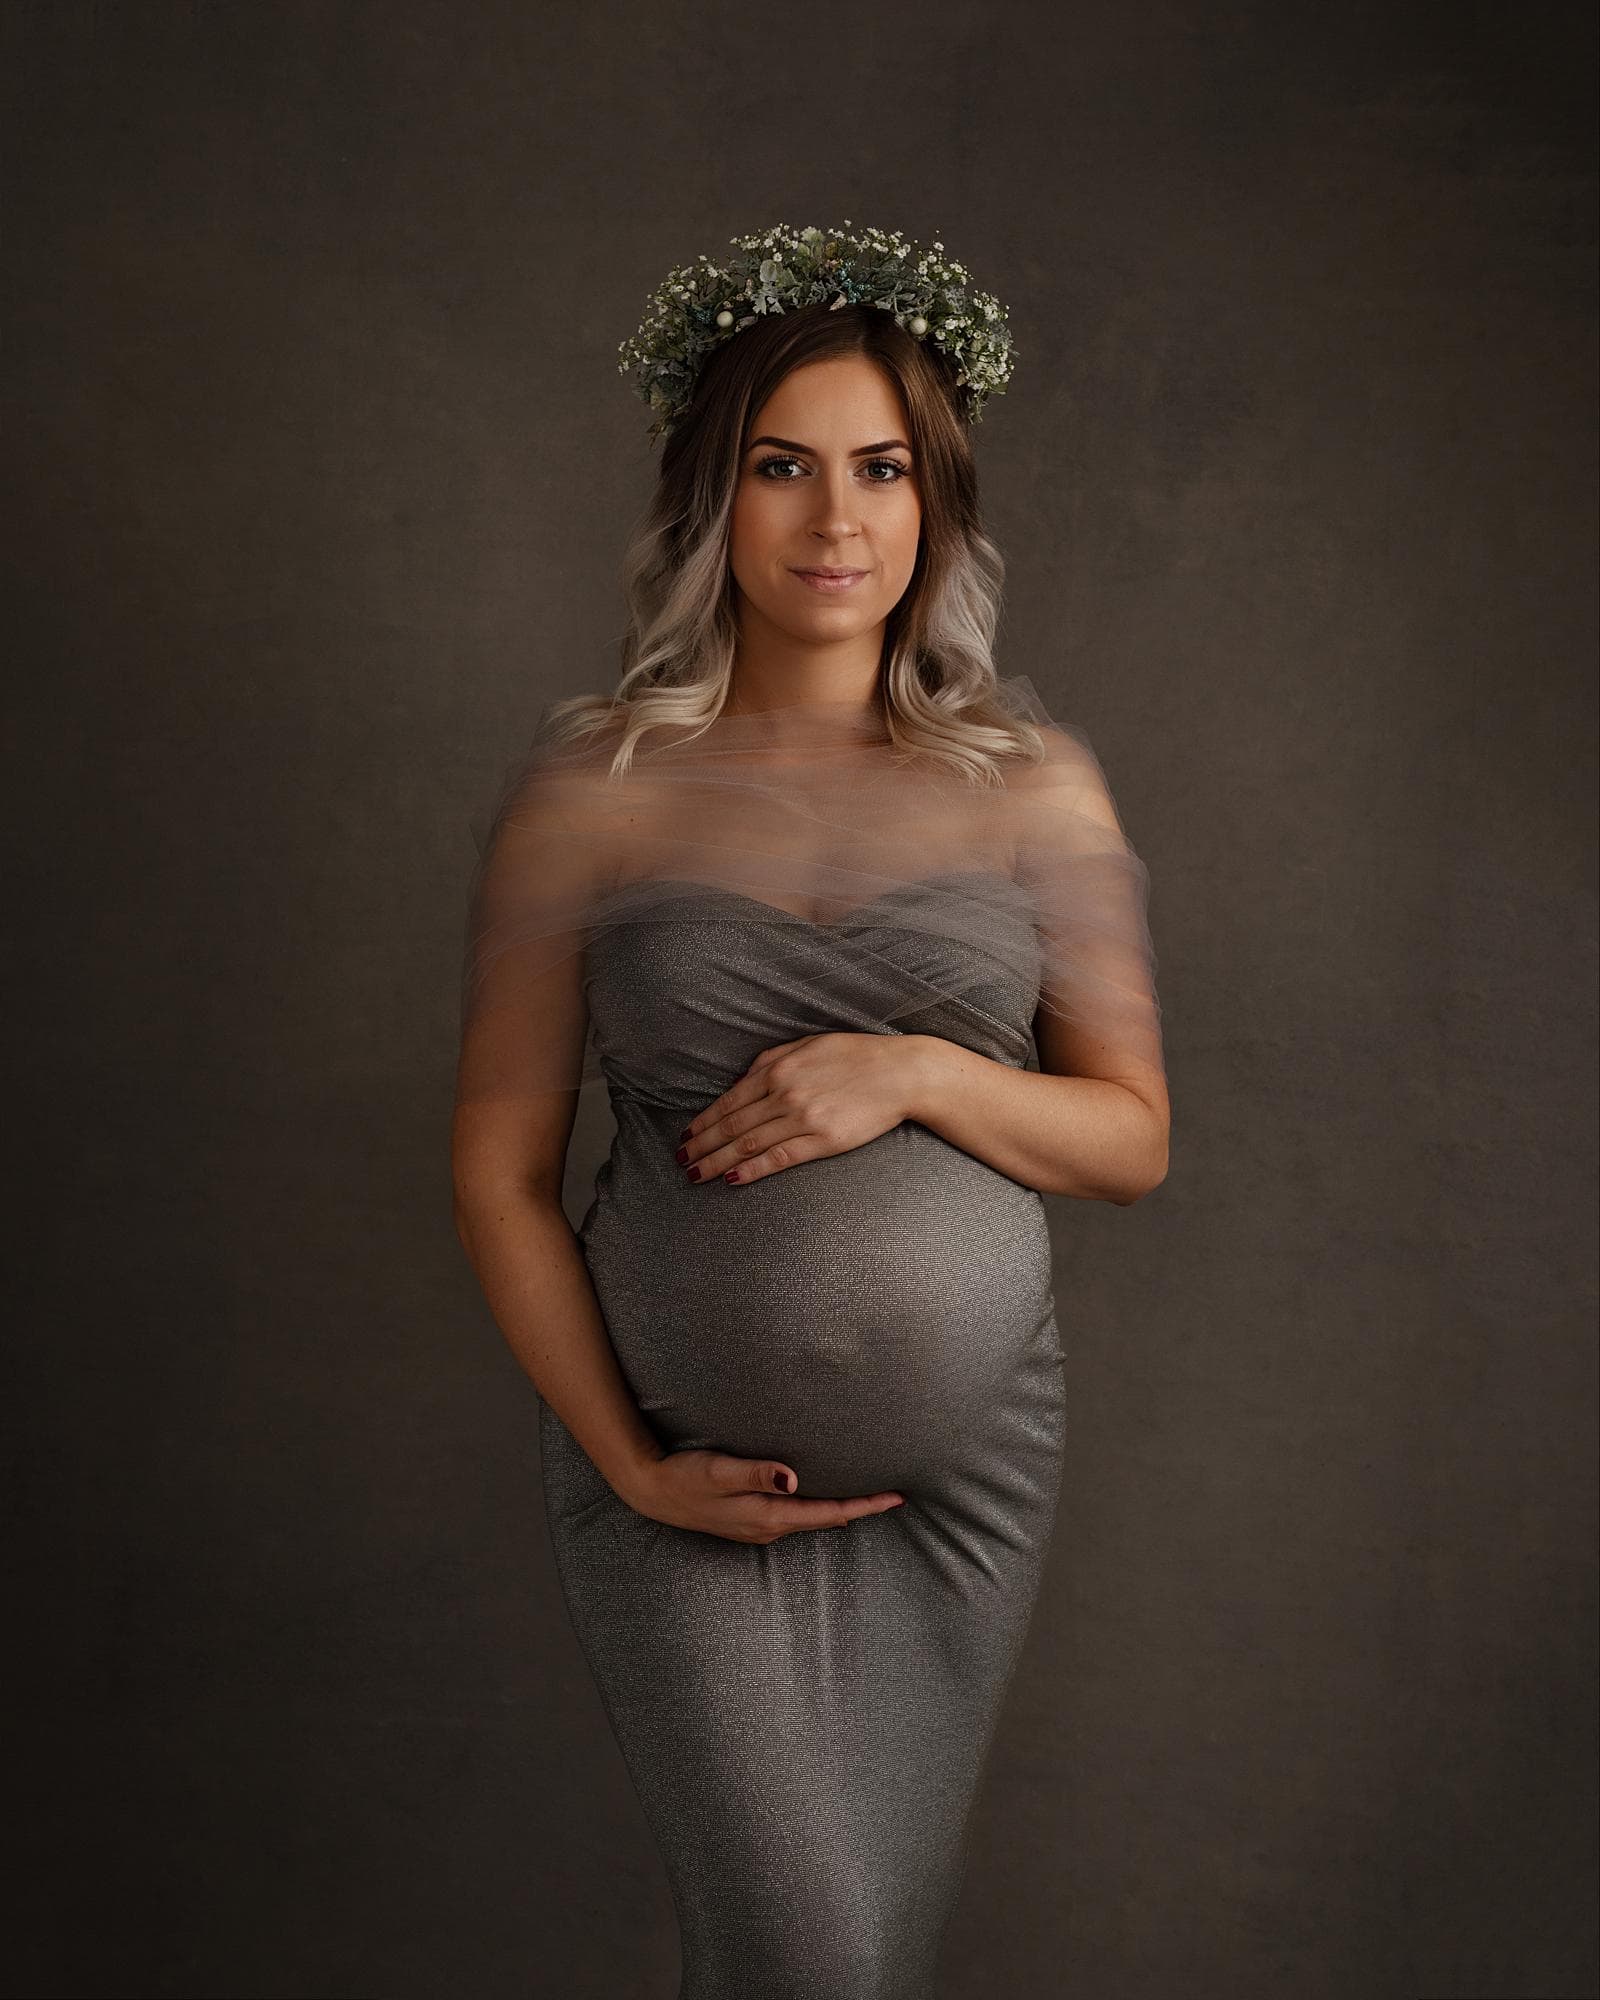 Pregnant woman posing in a grey dress for a maternity photoshoot in Alison McKenny's Suffolk studio